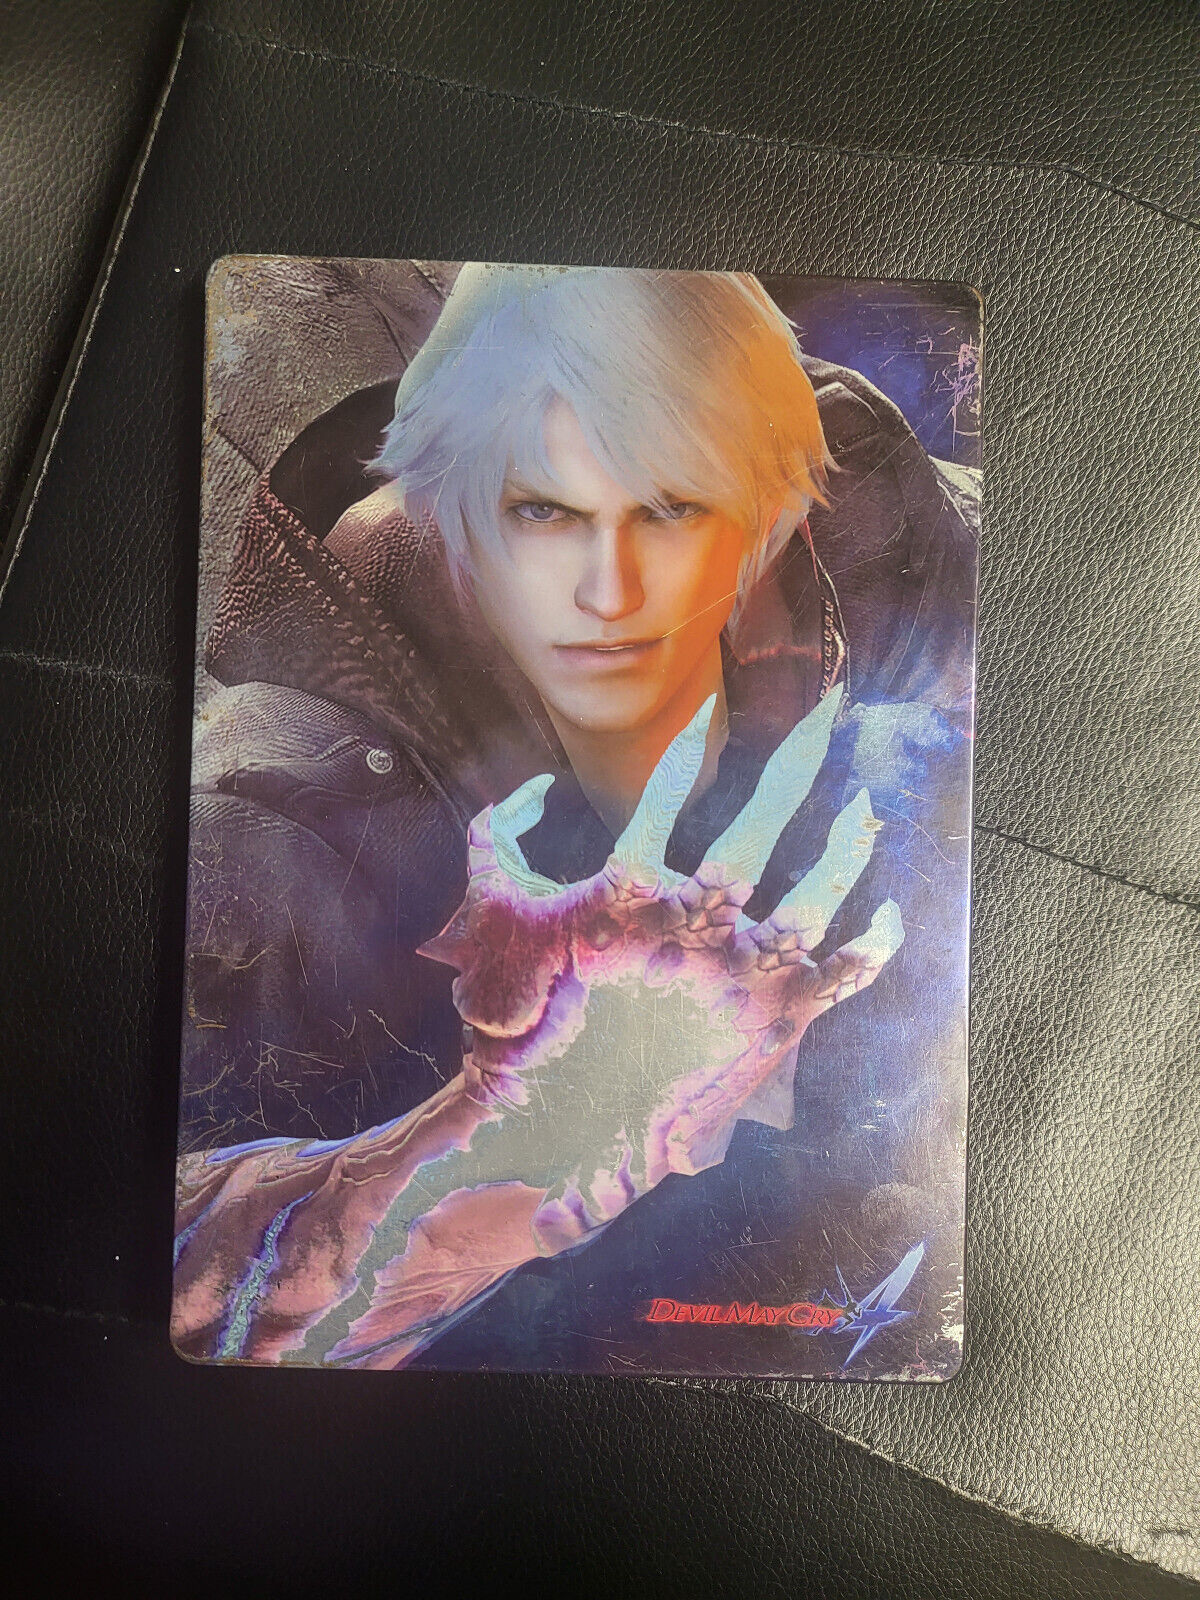 Devil May Cry 4 Collector's Edition Xbox 360, 2008 Steelbook. No Slip Cover+ DVD - $14.84